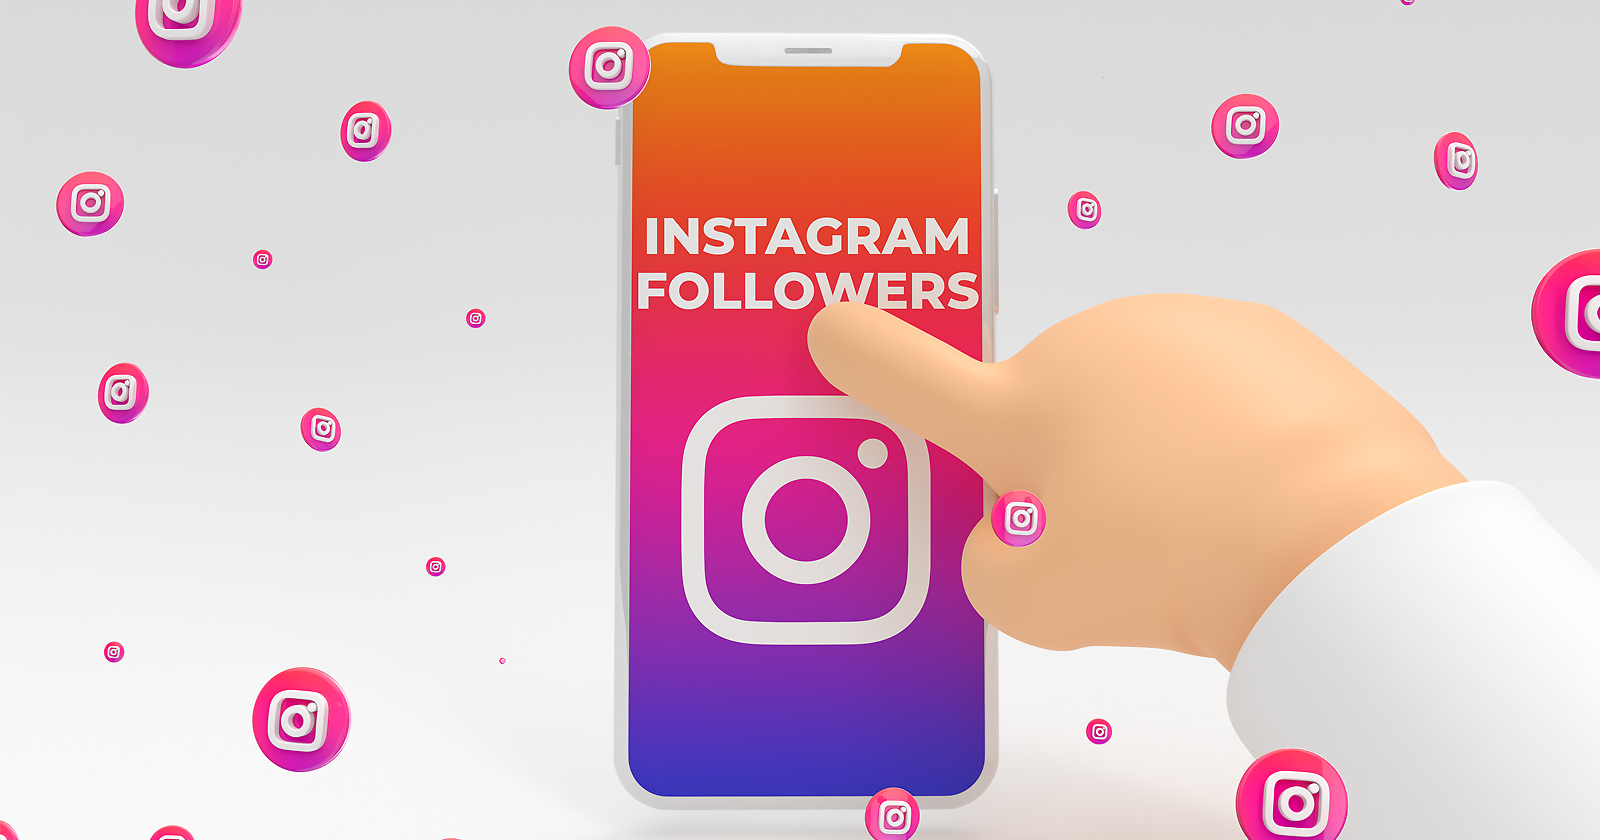 How To Increase Your Instagram Followers Naturally?